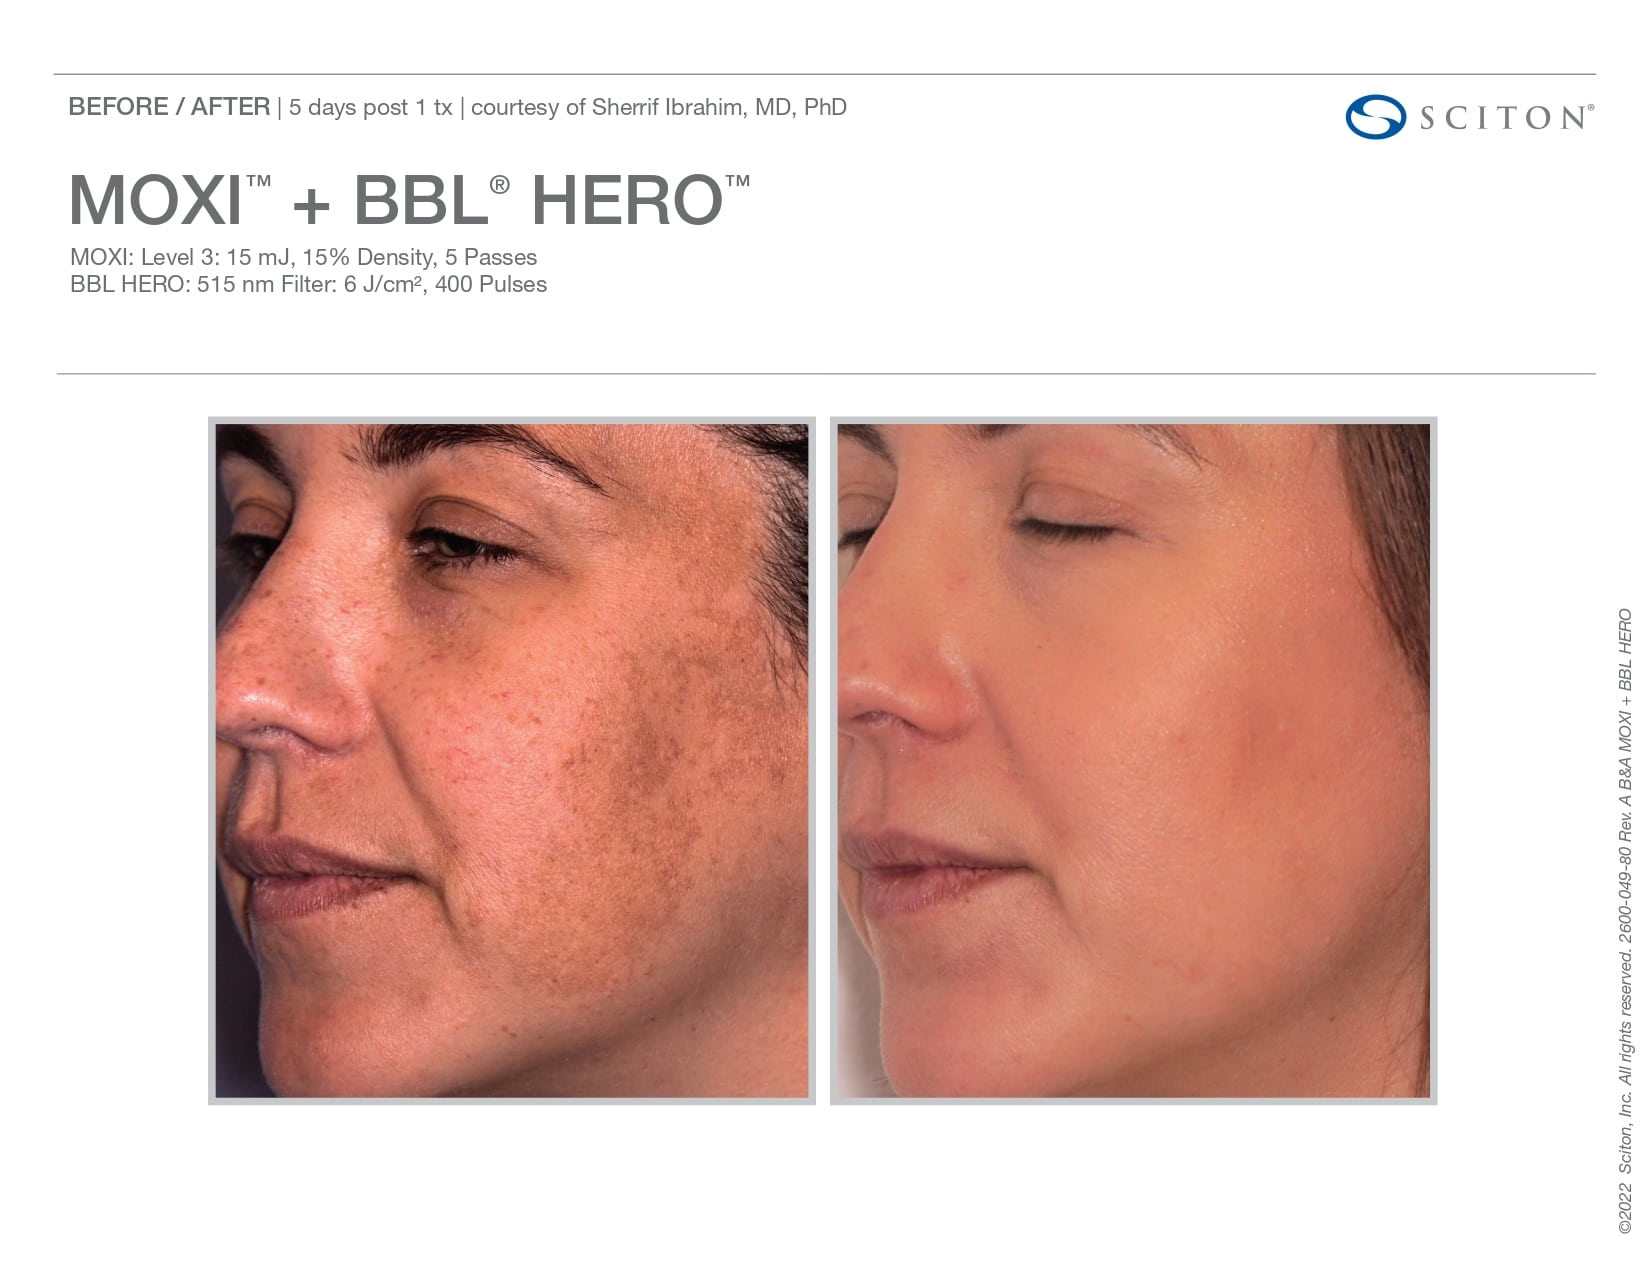 female patient’s cheek before and after BBL and MOXI laser treatments, skin clearer, less discolored after